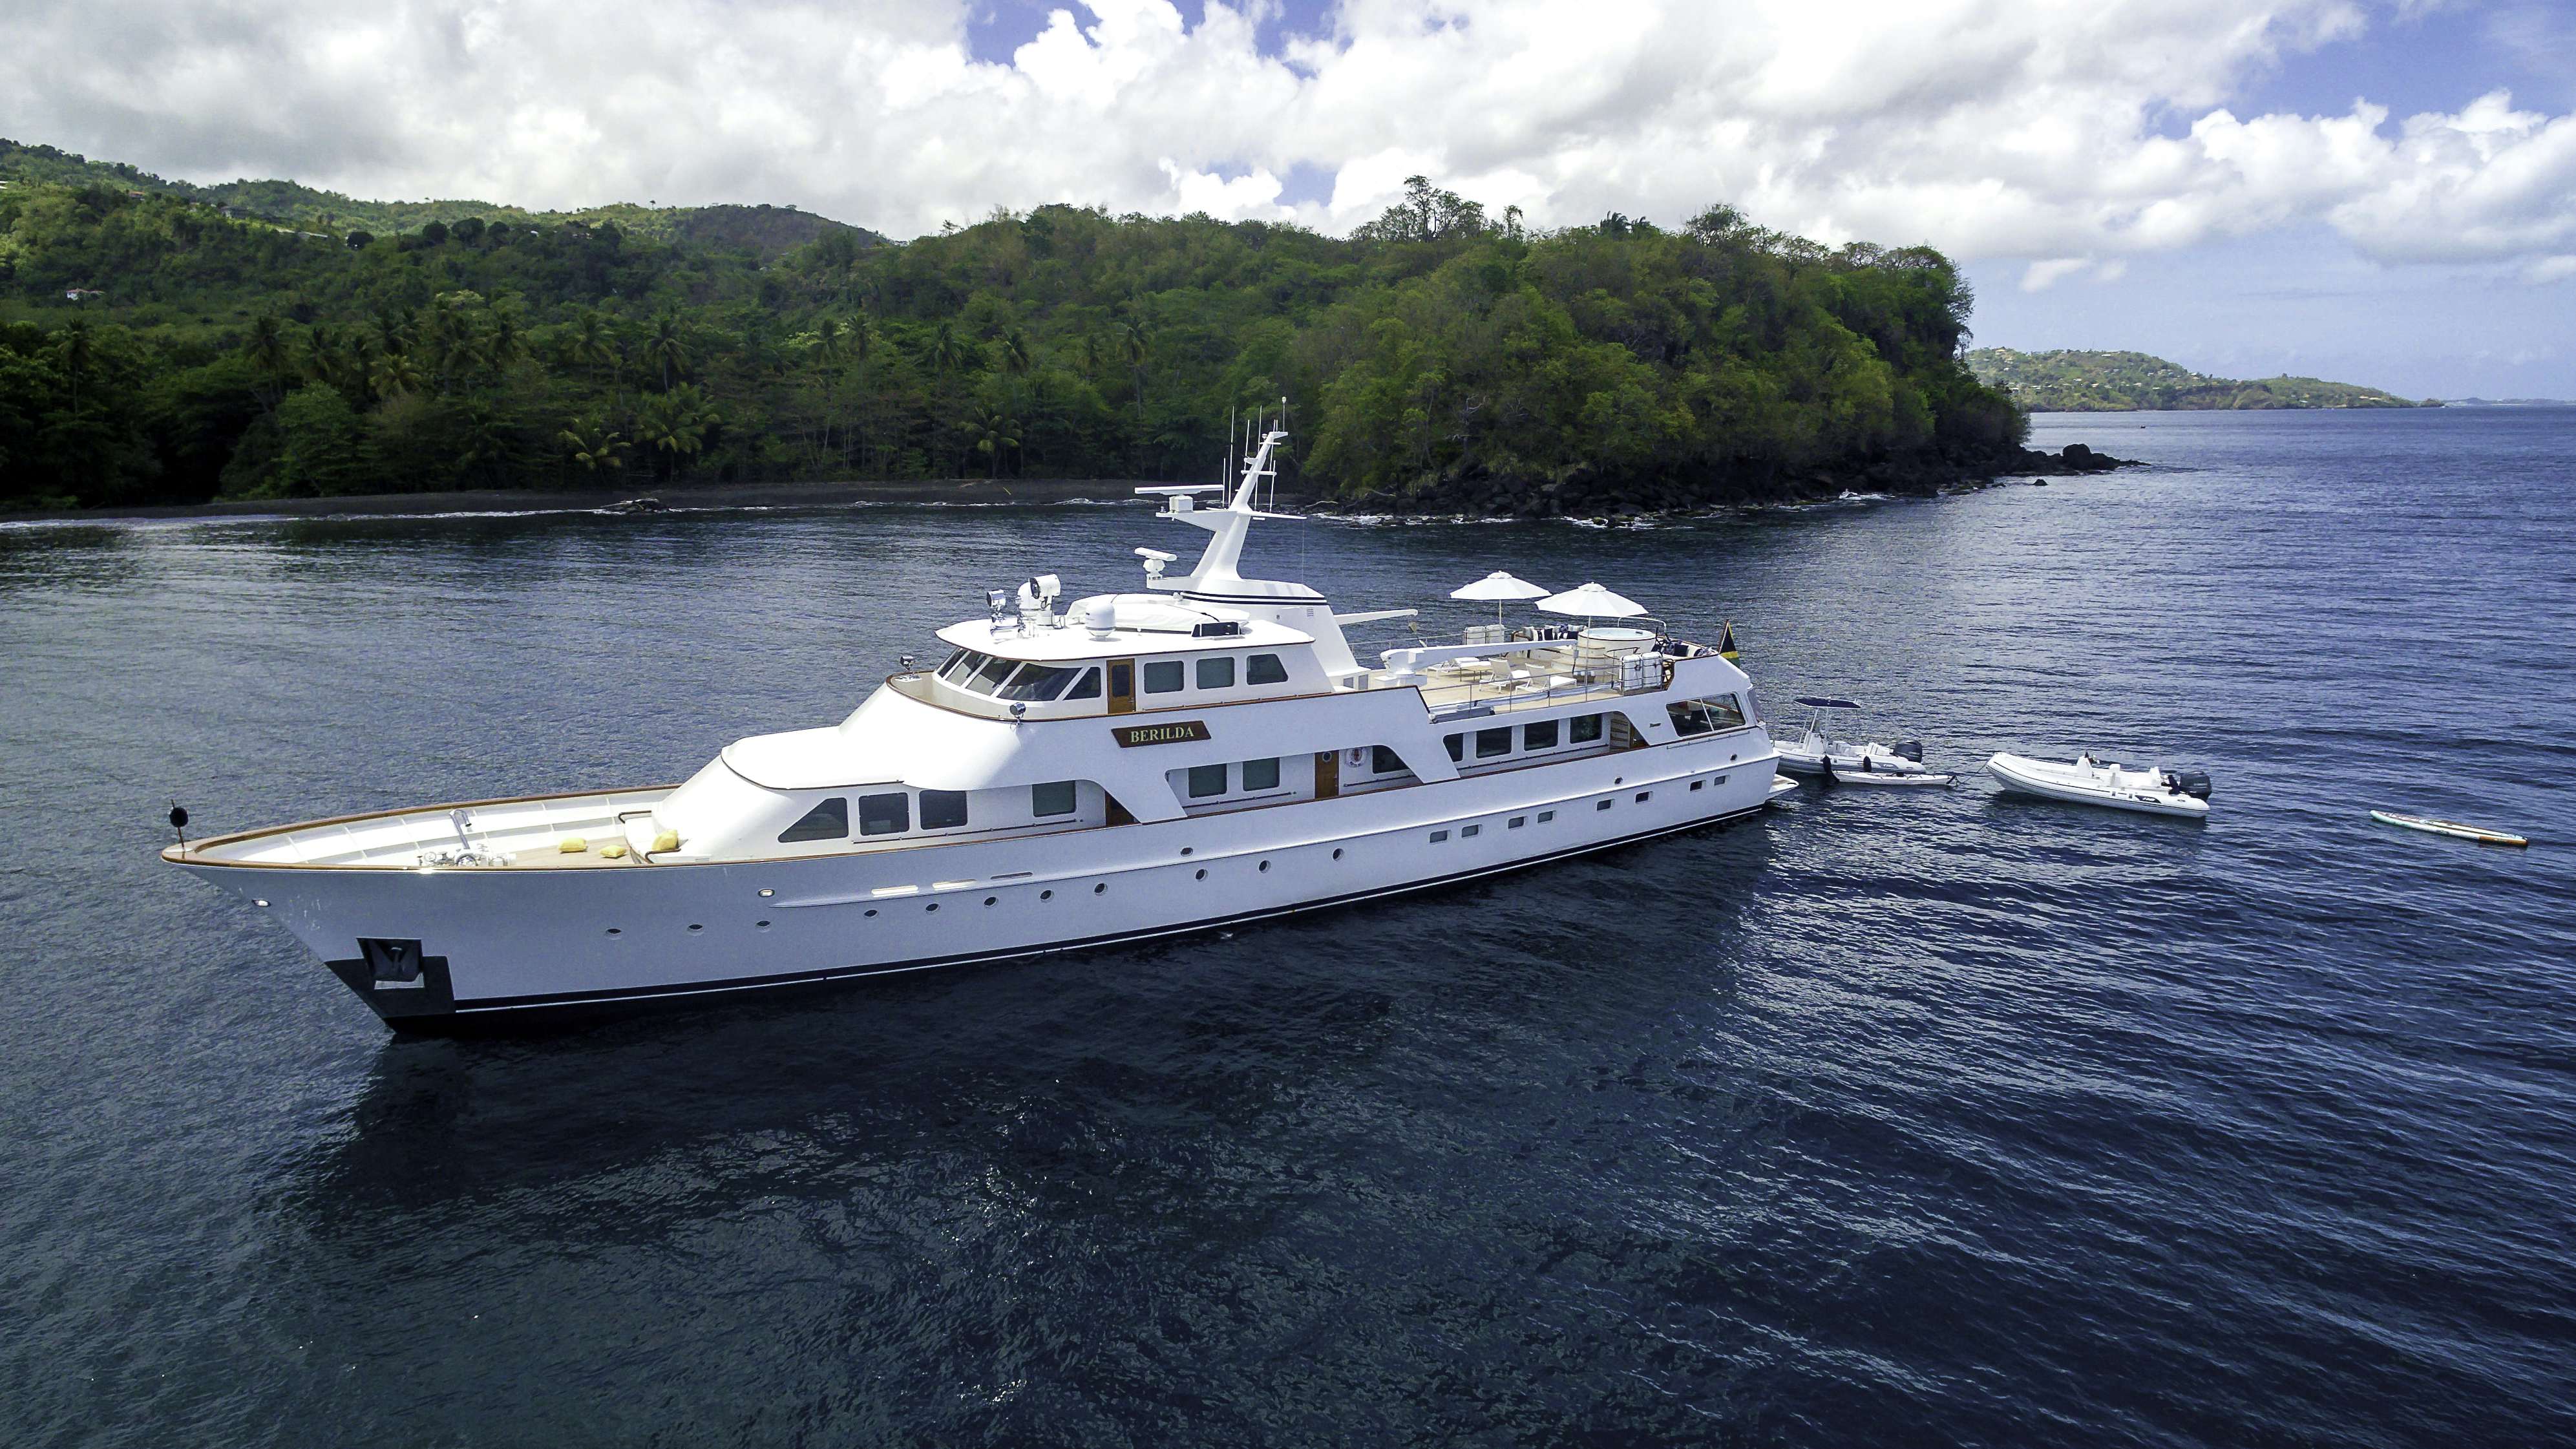 Watch Video for Berilda Yacht for Charter